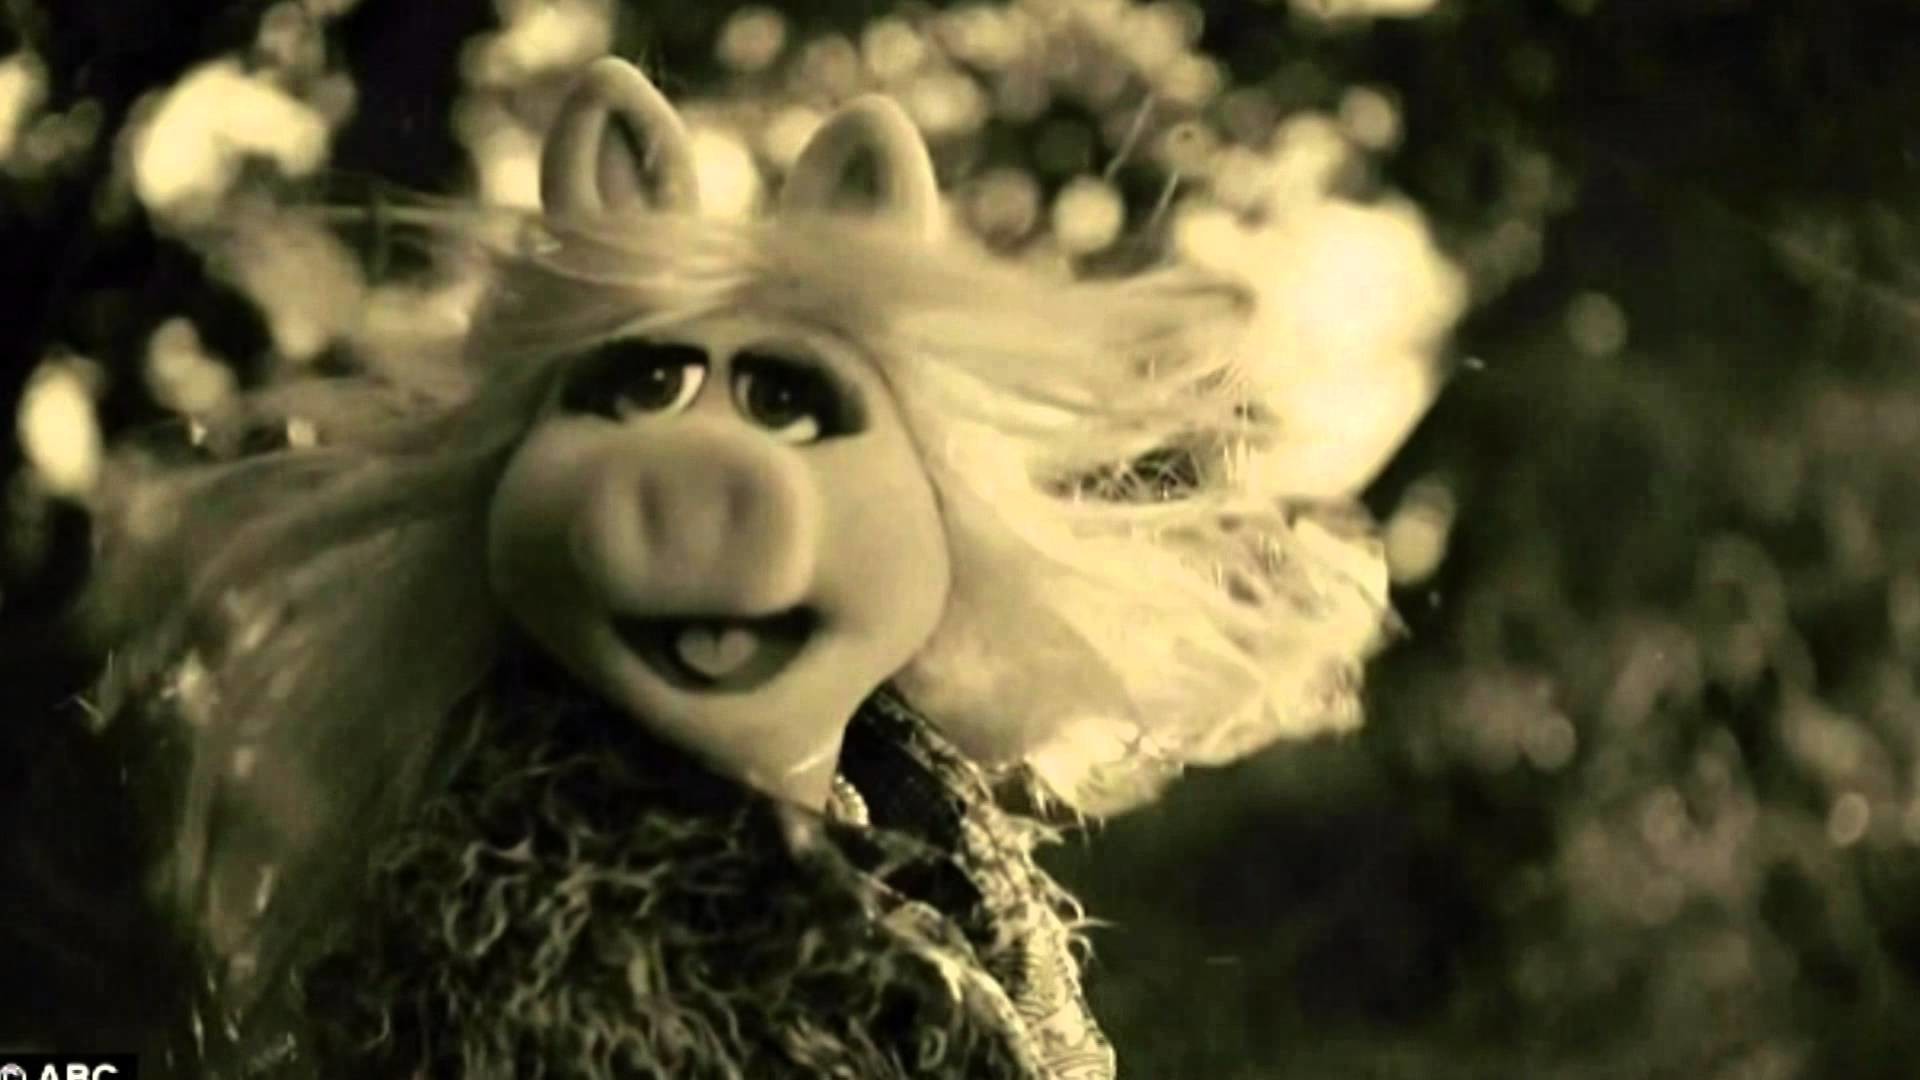 1920x1080 Hello, it's Miss Piggy! Adele "Hello" gets the Muppets treatment in  hilarious promo during the AMAs - YouTube